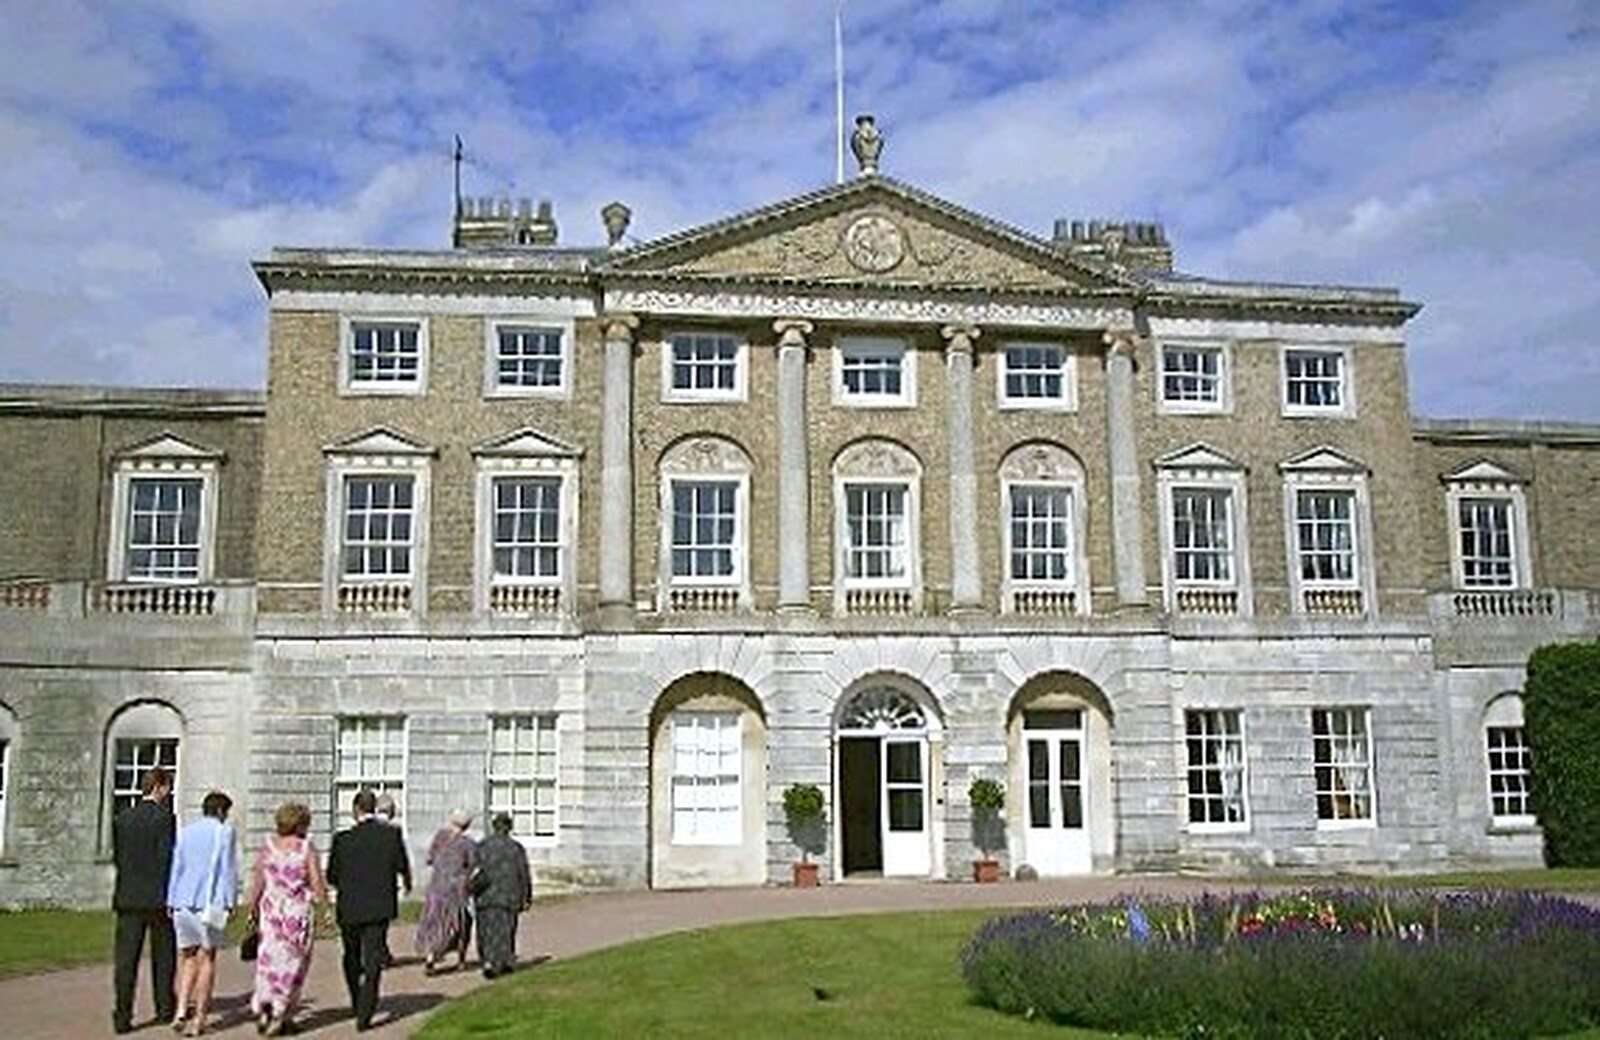 The front of Wolverstone Hall from Phil and Lisa's Wedding, Woolverston Hall, Ipswich, Suffolk - 1st July 2001